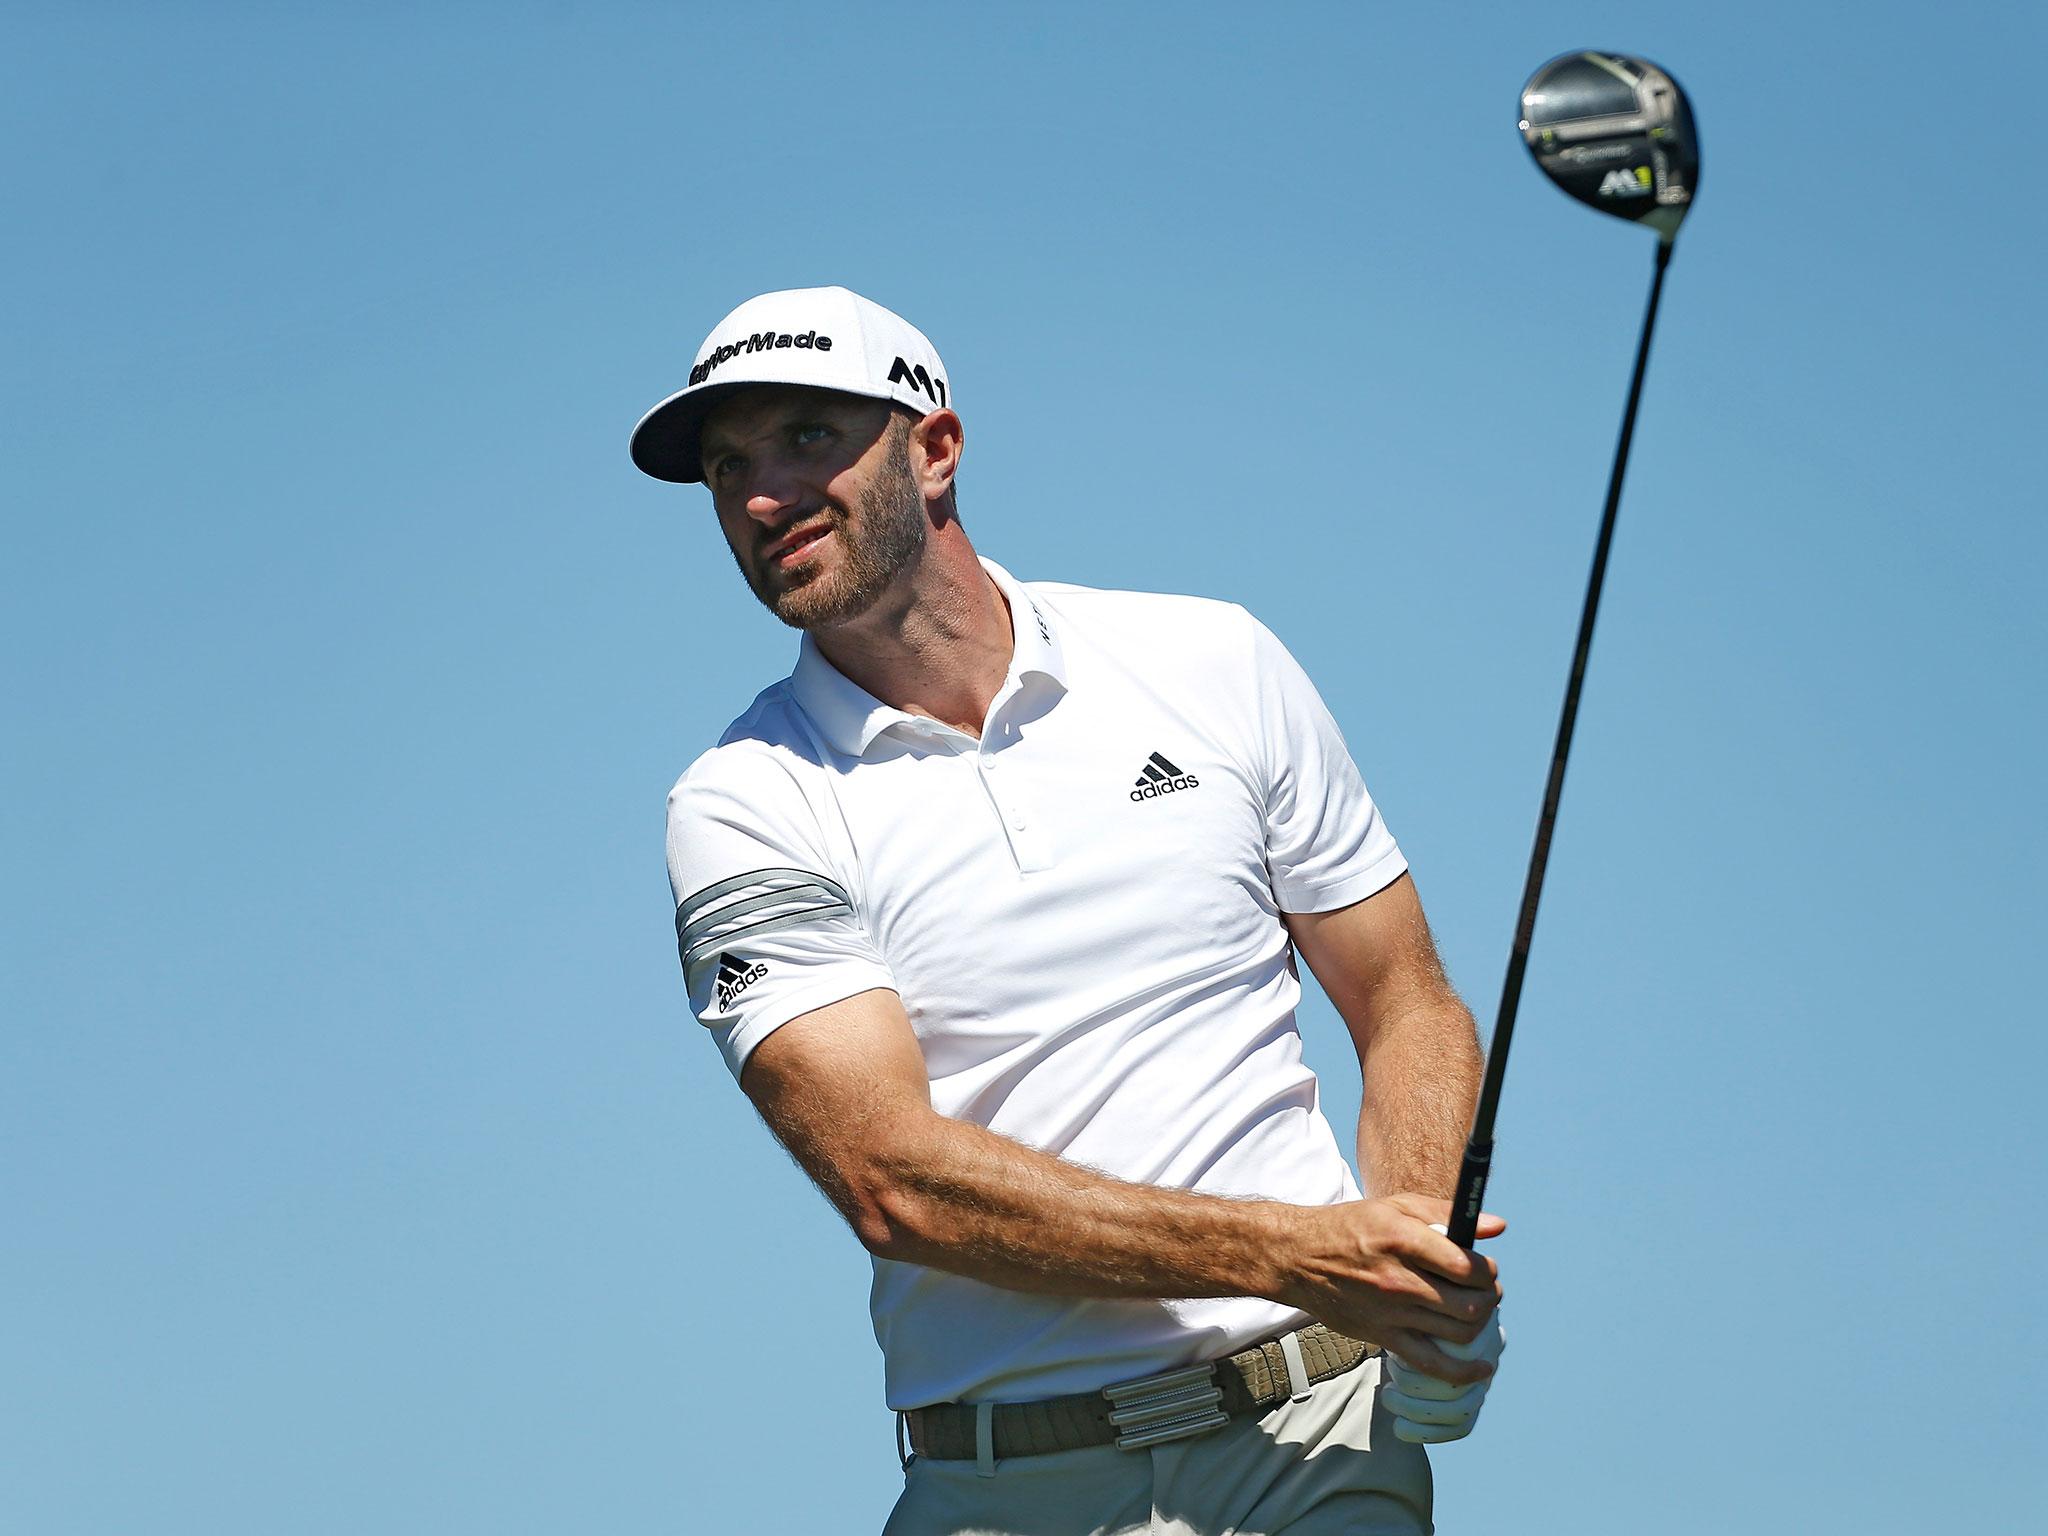 Dustin Johnson returned at Eagle Point from the back injury he suffered on the eve of The Masters